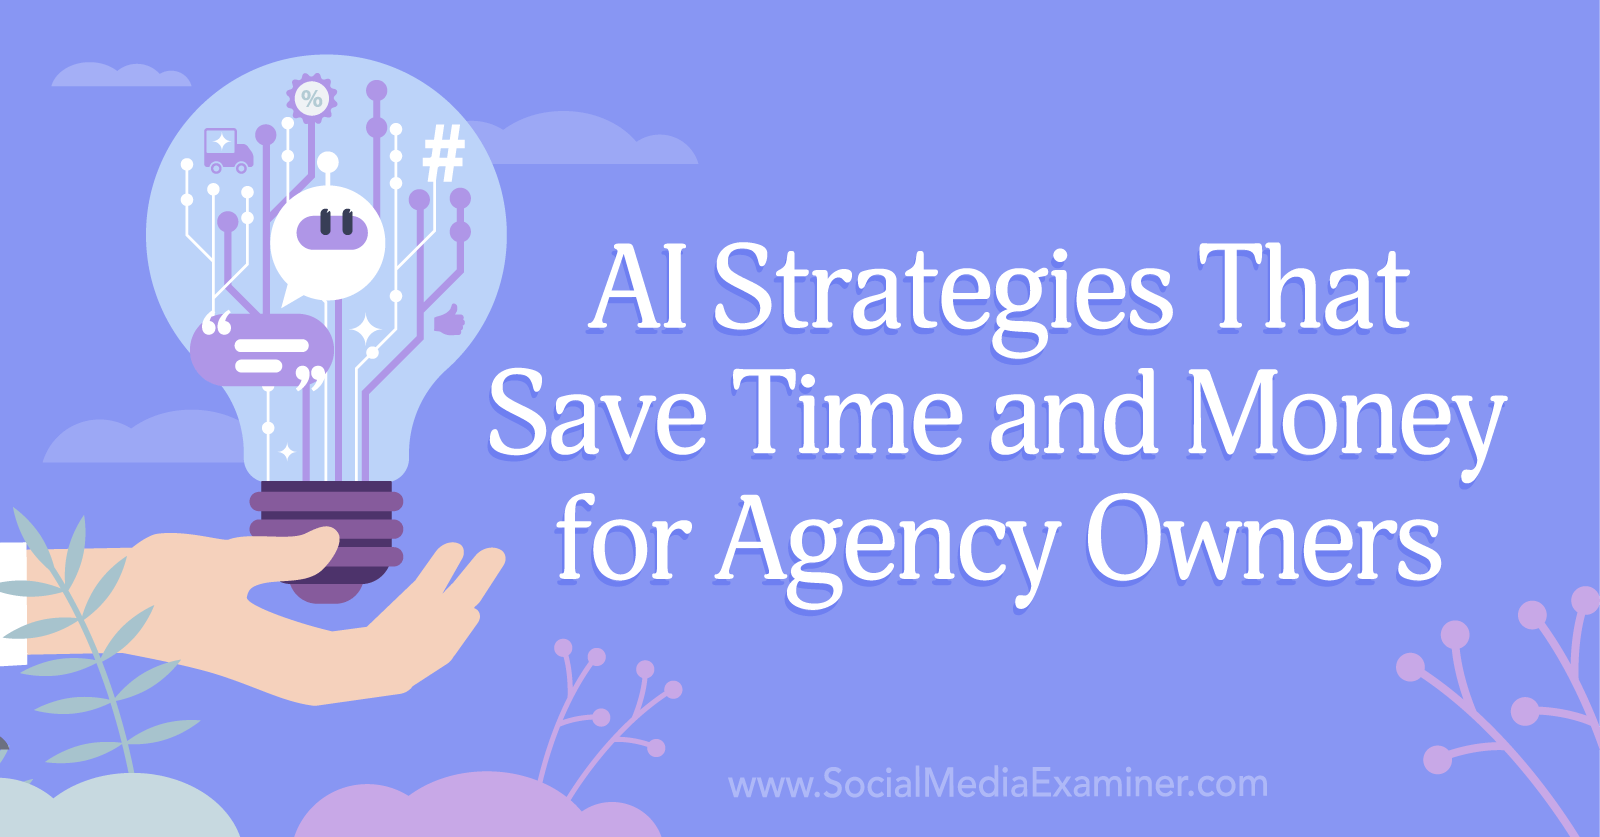 AI Strategies That Save Time and Money for Agency Owners by Social Media Examiner